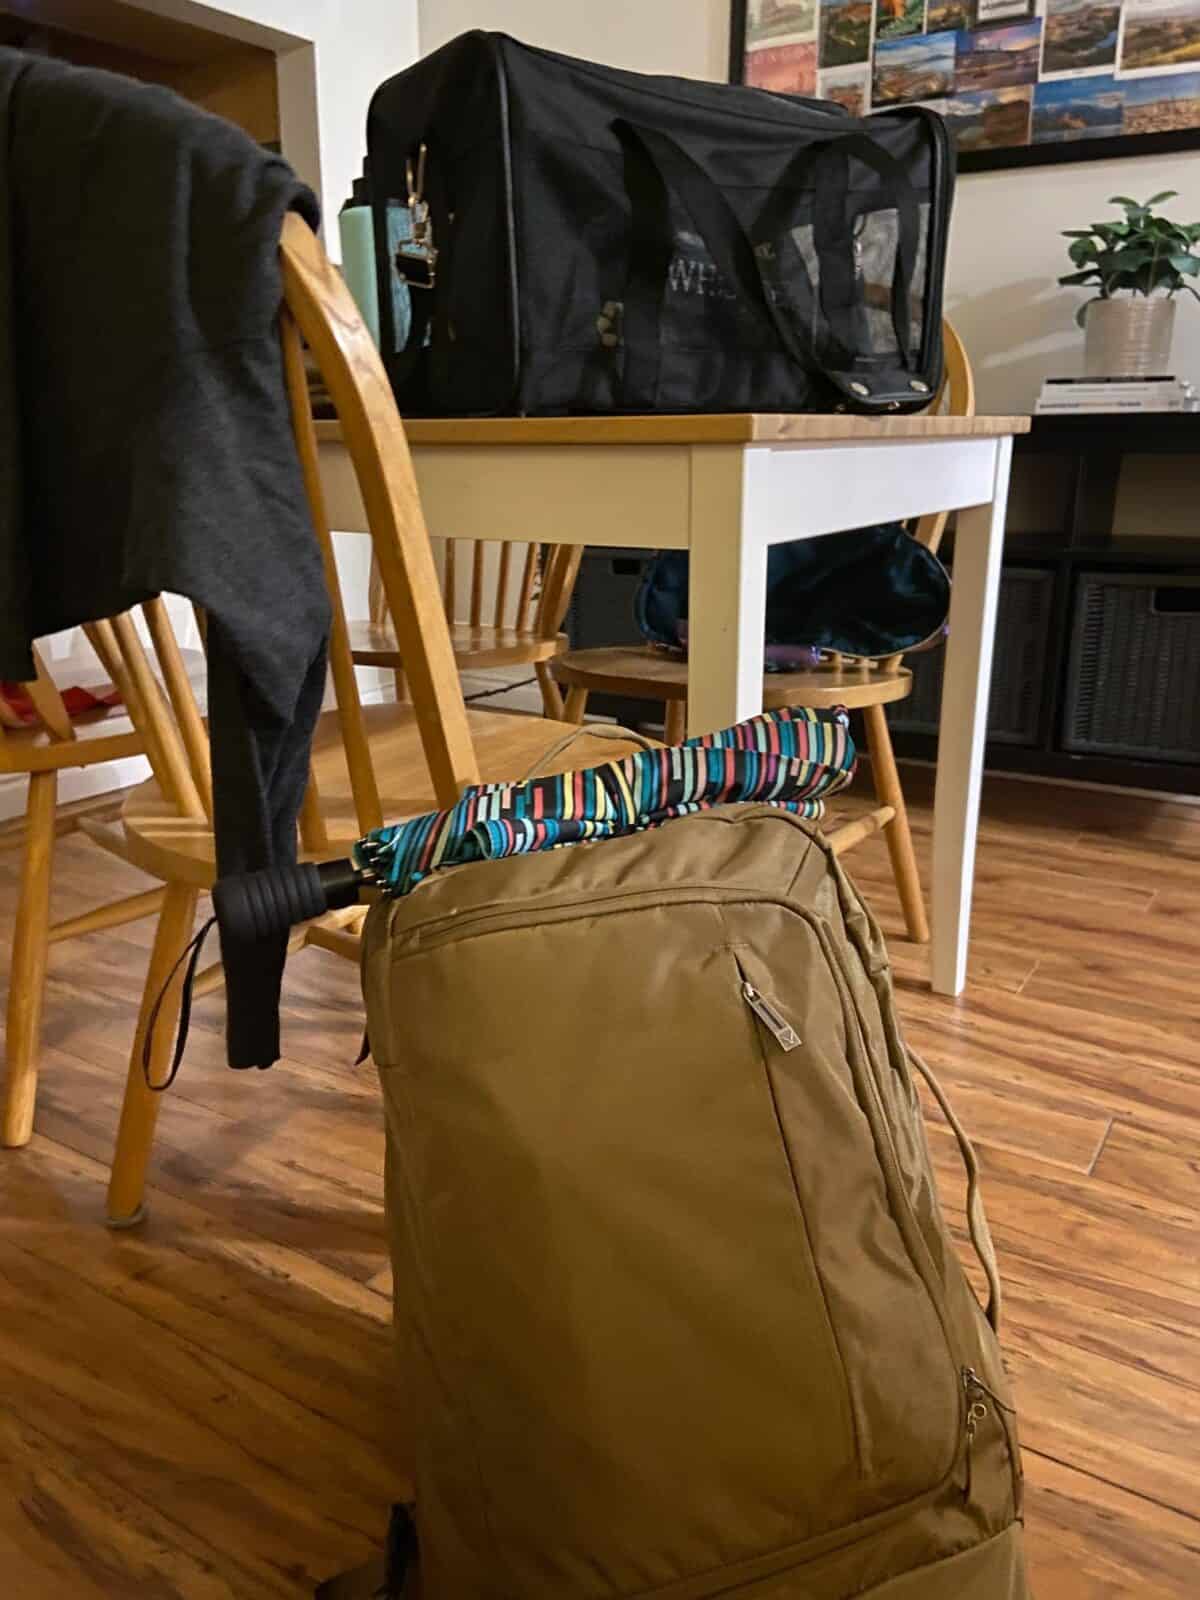 My carry-on backpack sitting on the floor with an umbrella perched on top, packing hacks and mistakes